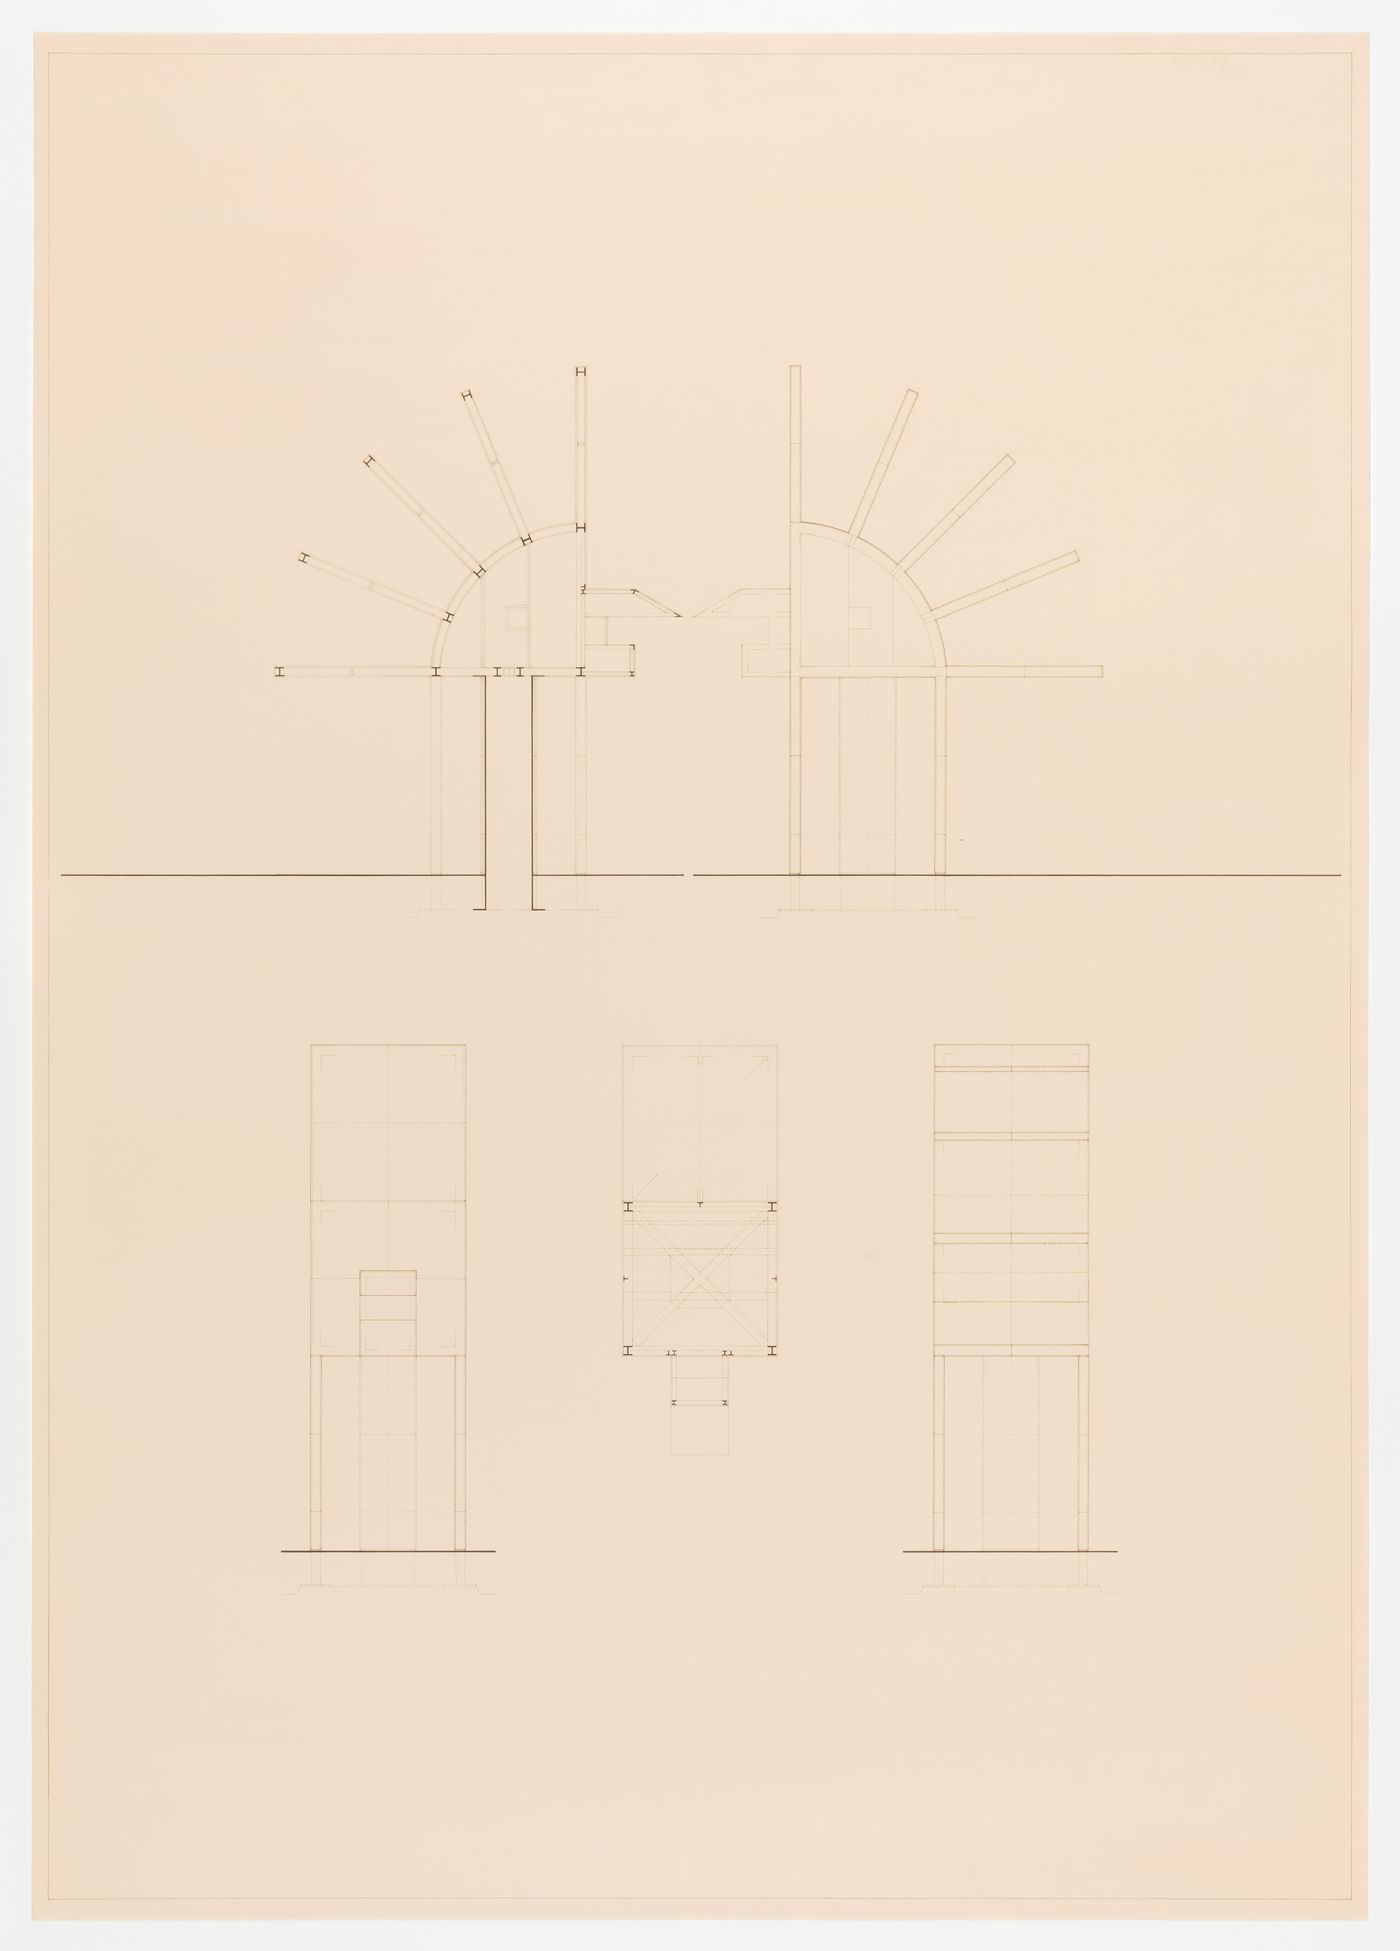 Studio for a Painter: plan, elevations and section